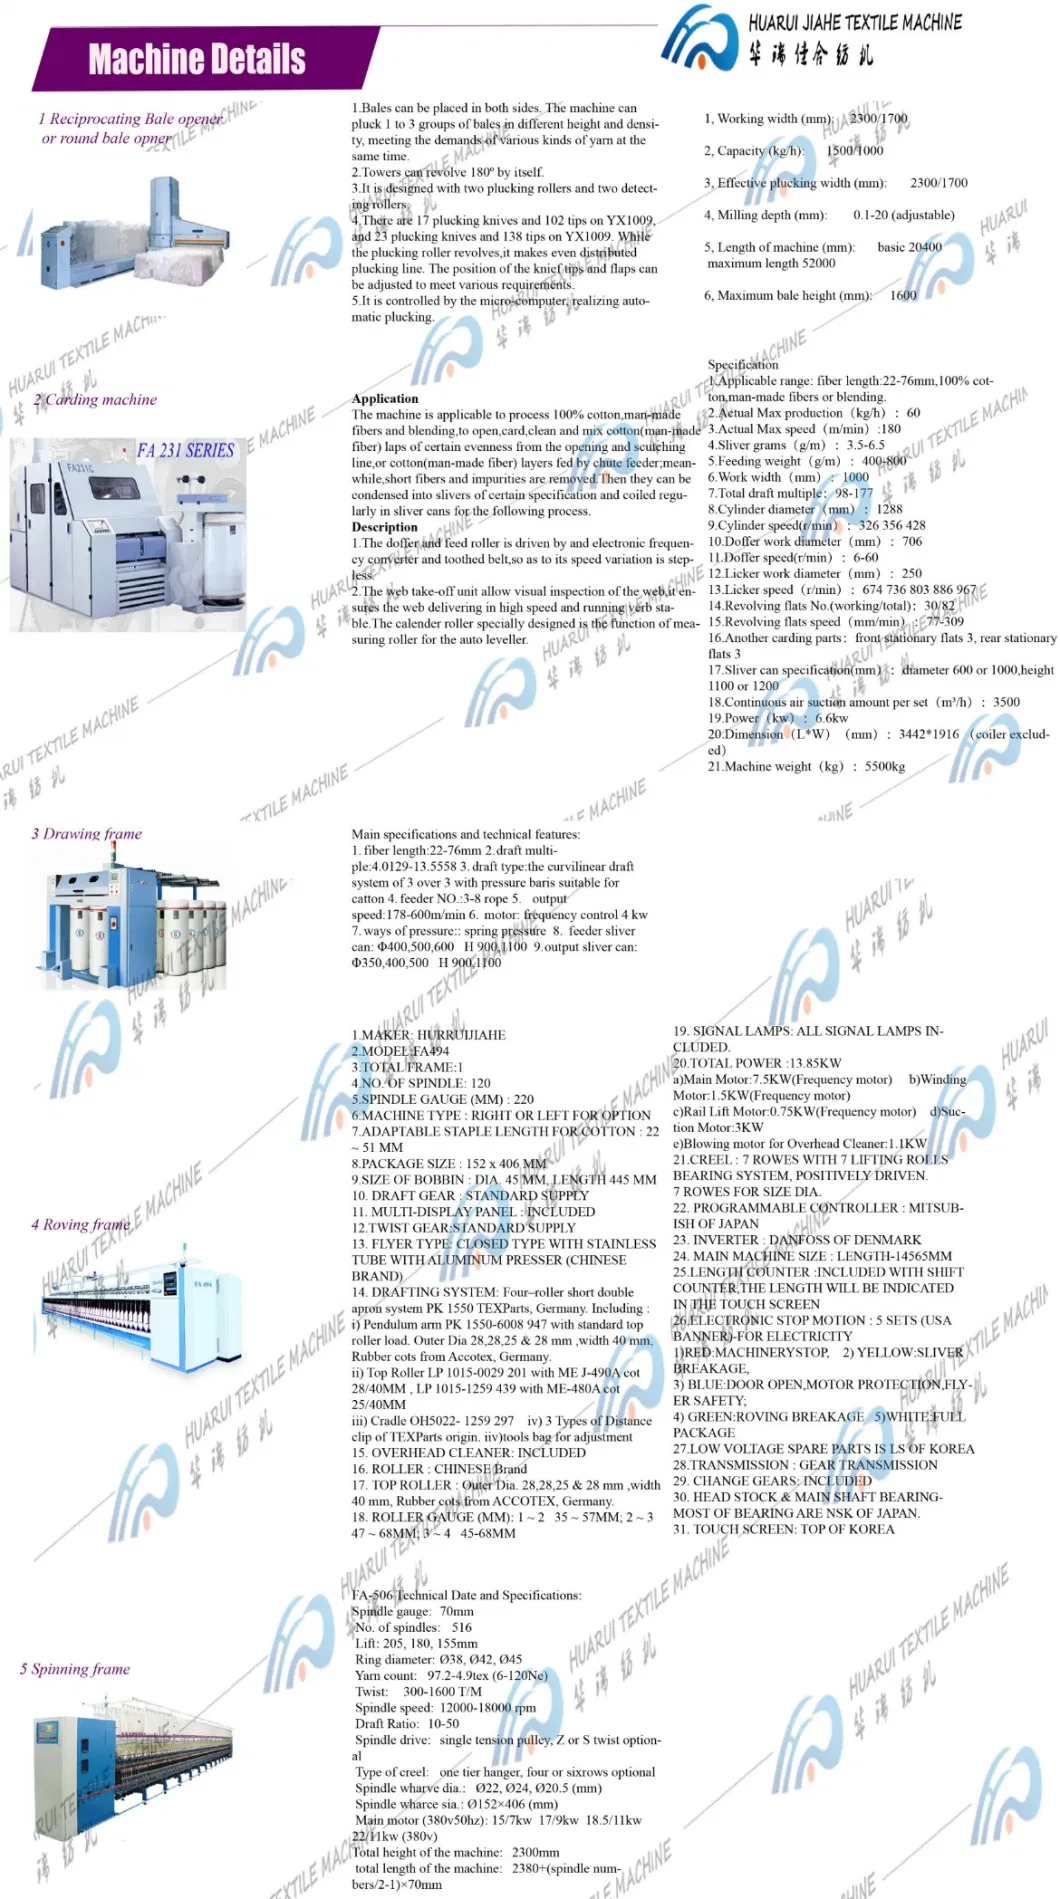 Automatic Control Yarn Steaming Machine High Temperature Jet Overflow Dyeing Machine Hot Sale &amp; High Quality China Wholesale Market Fiber and Yarn Dyeing Machin